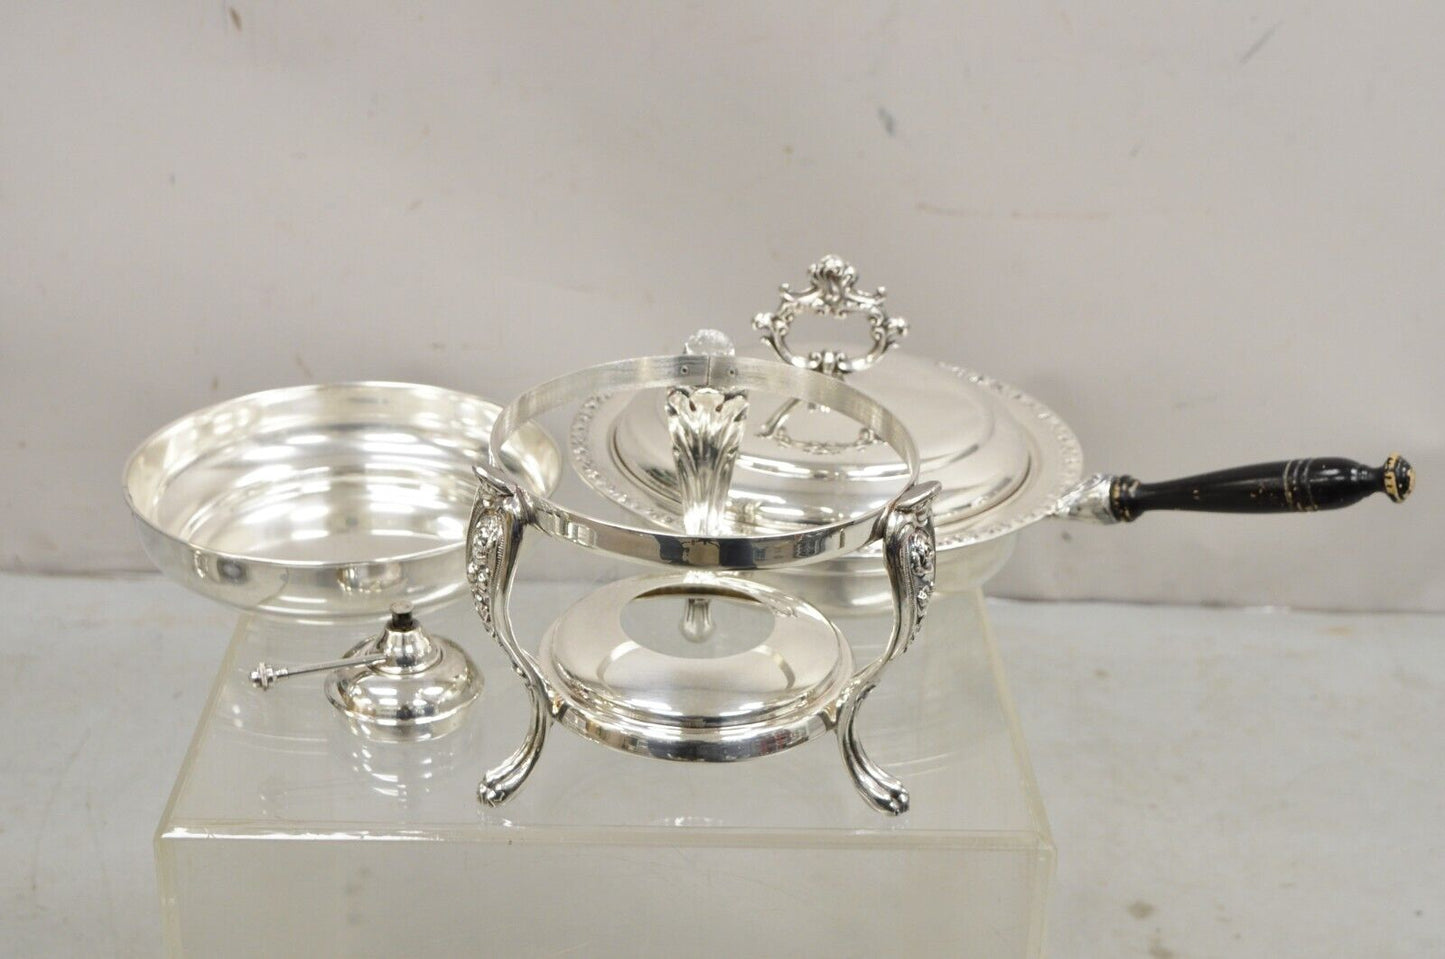 Vintage English Victorian Style Silver Plated Chafing Dish Warmer on Stand